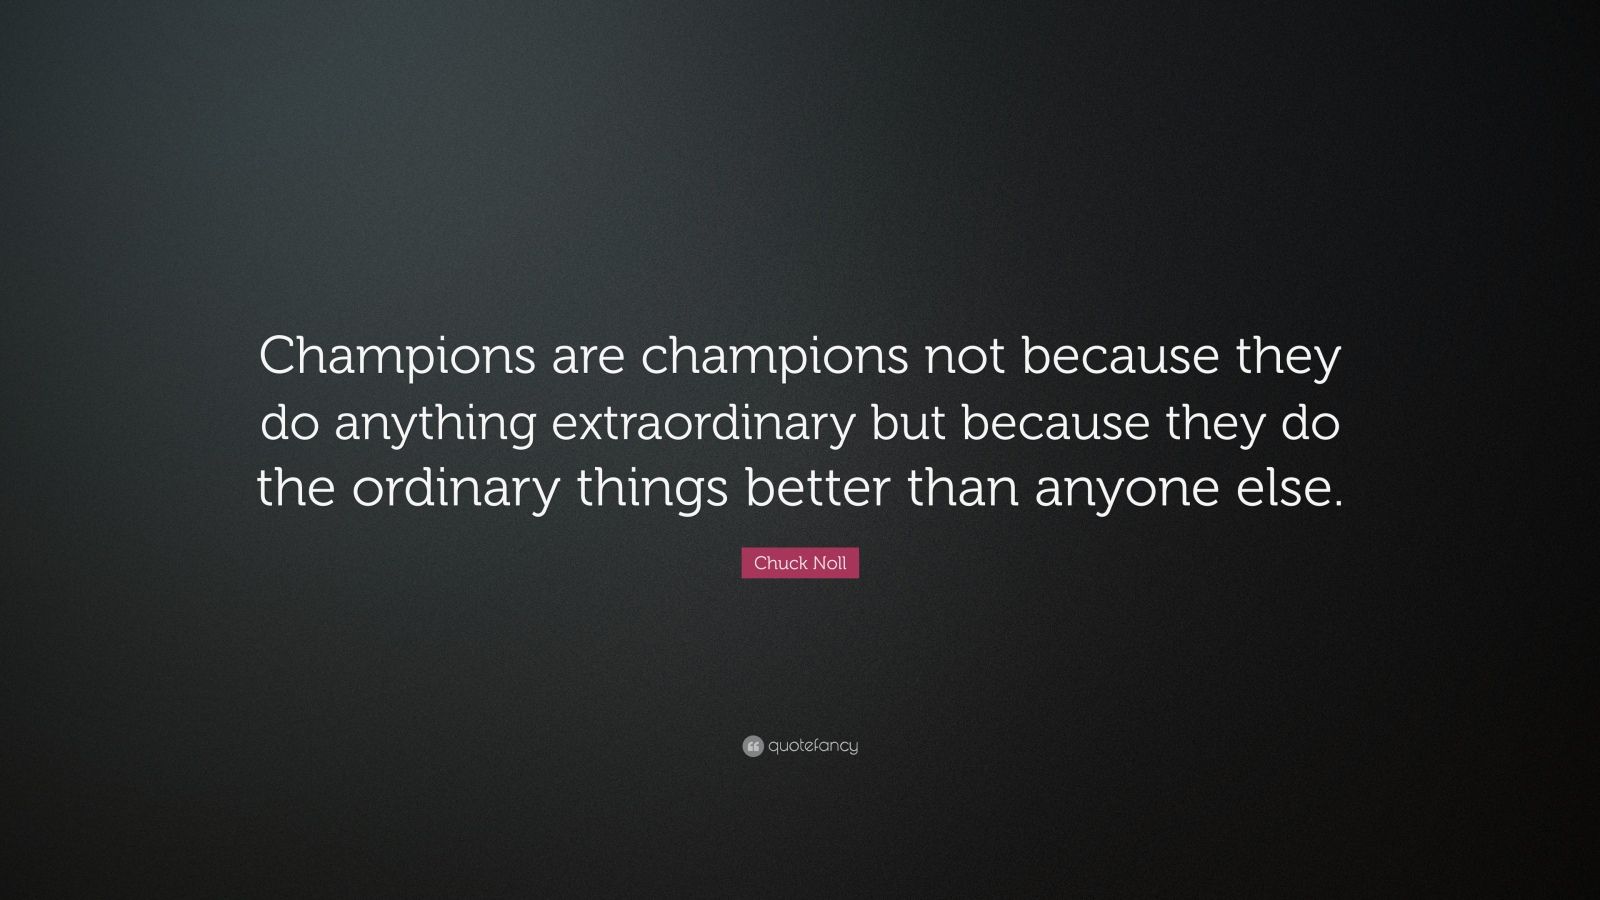 Chuck Noll Quote: “Champions are champions not because they do anything